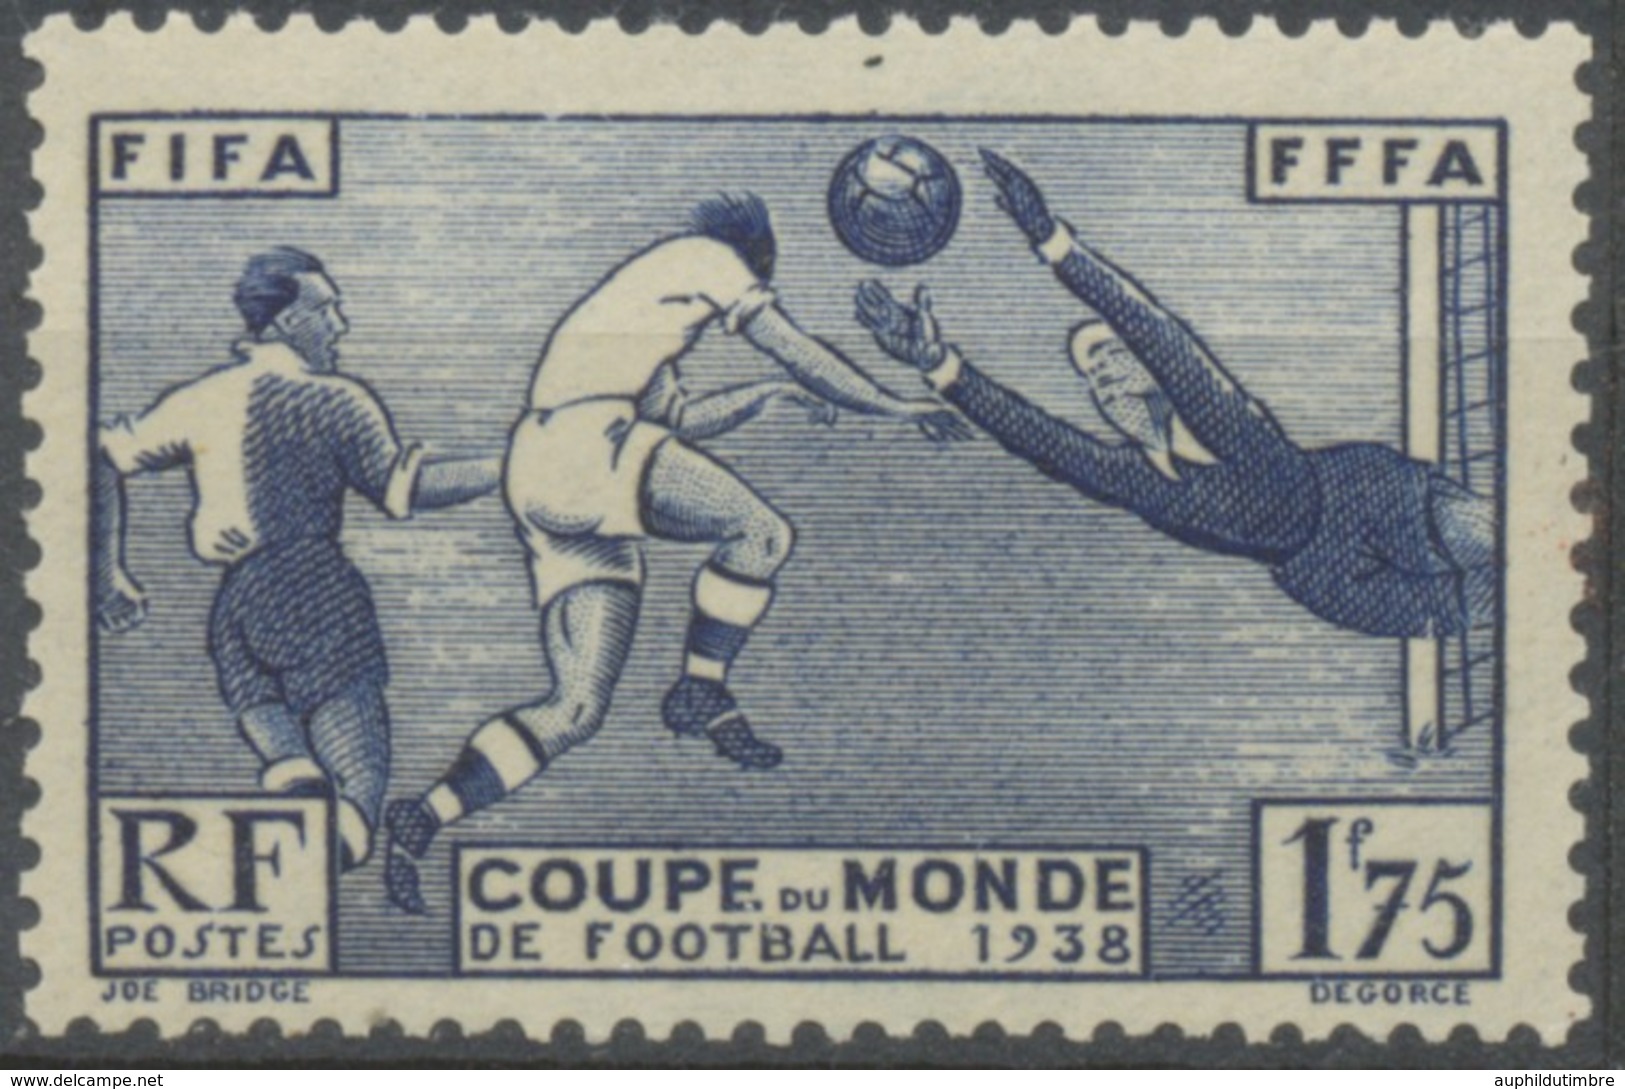 3e Coupe Mondiale De Football, à Paris. 1f.75 Outremer Neuf Luxe ** Y396 - Unused Stamps